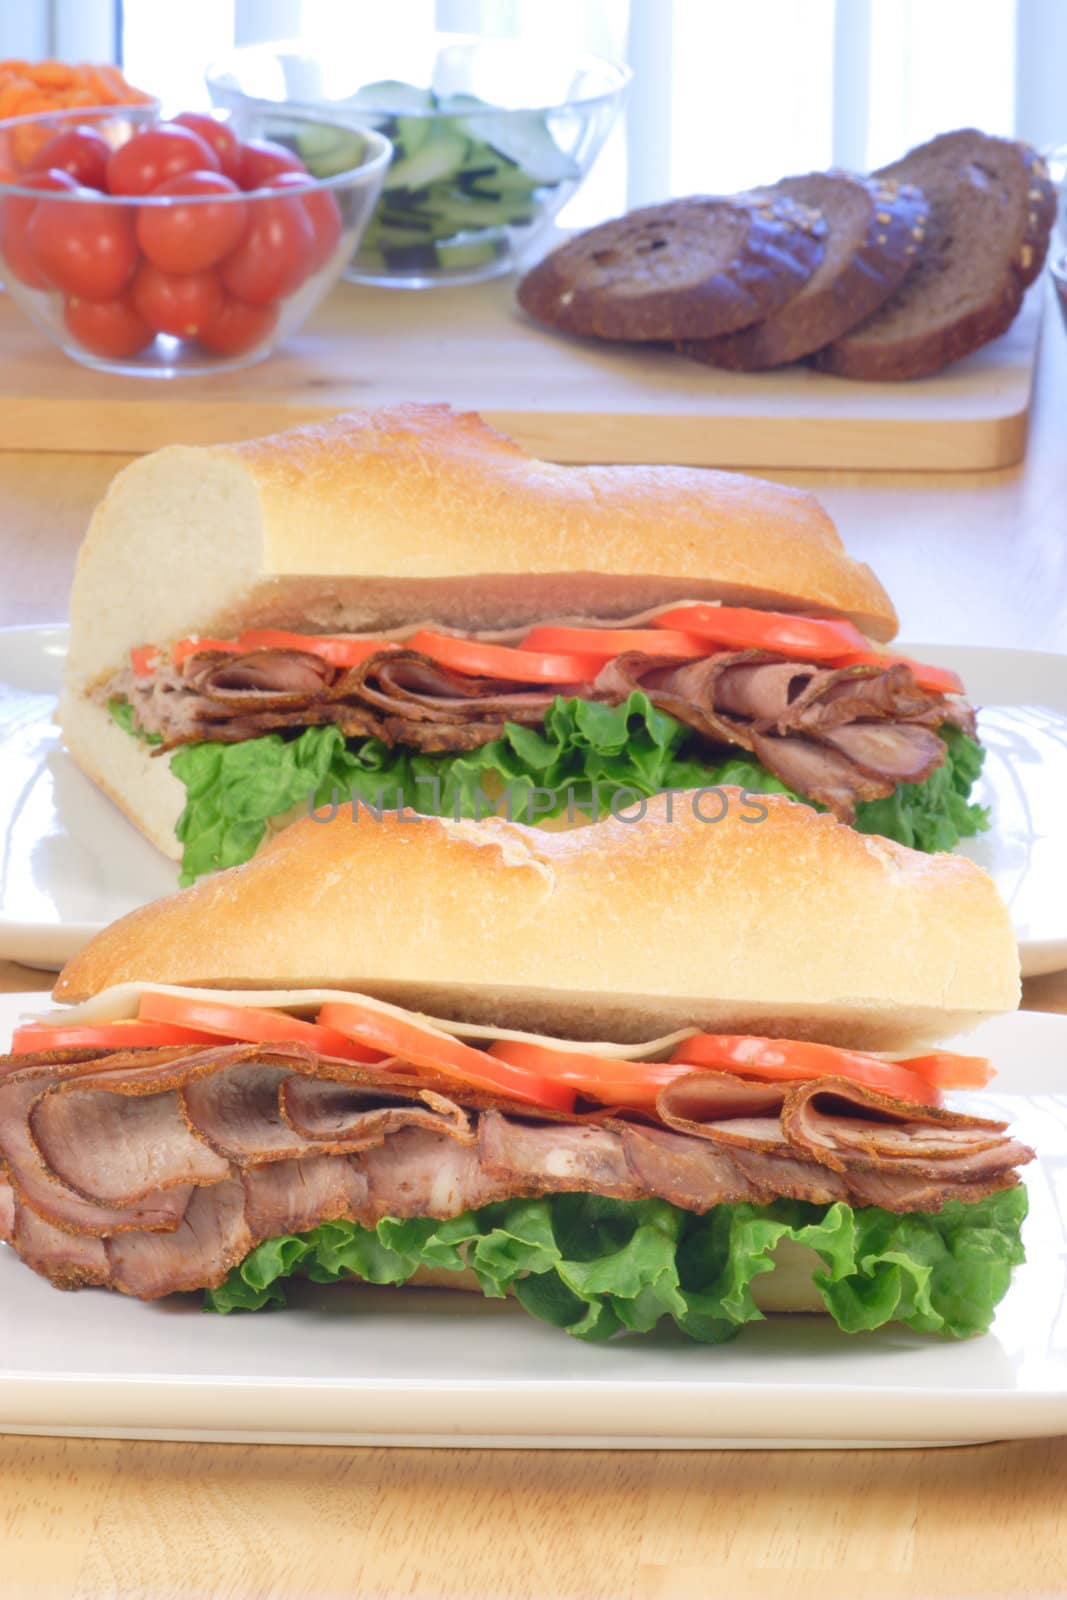 oven roasted beef sub and veegies by tacar